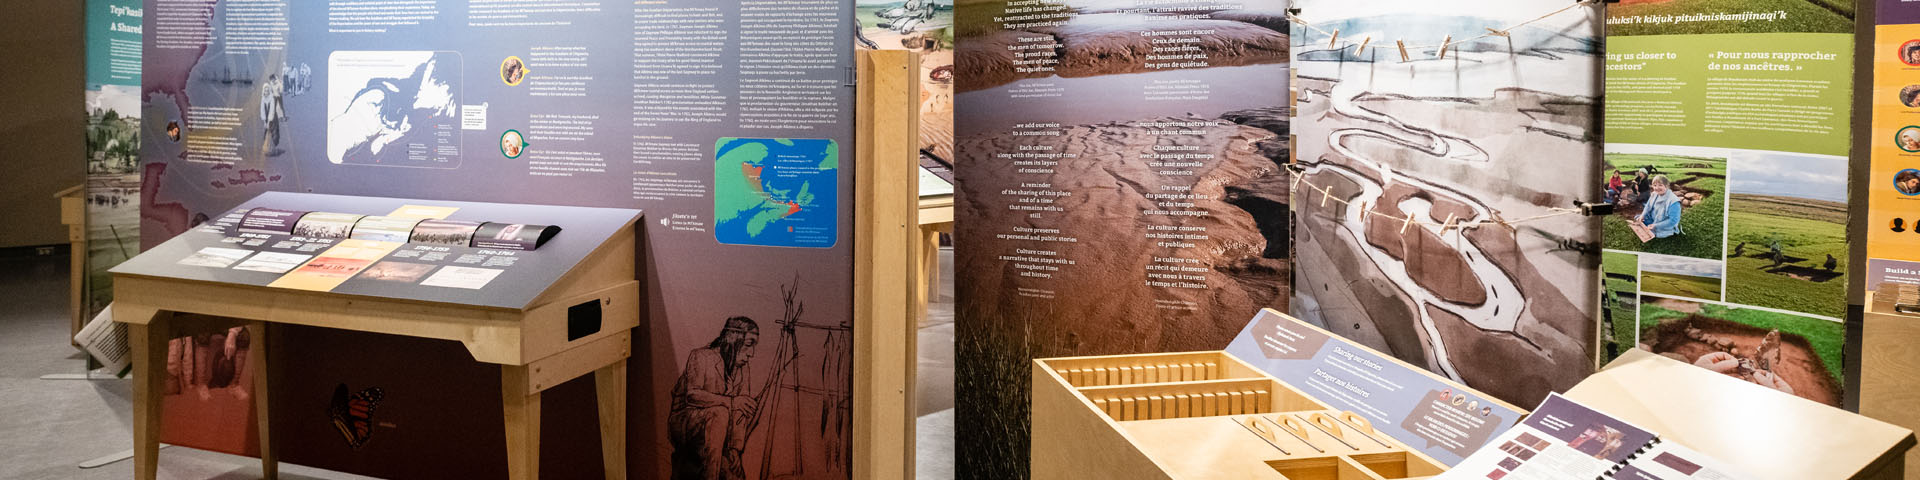 A portion of the Revealing Chignecto exhibit, featuring various interpretive panels.